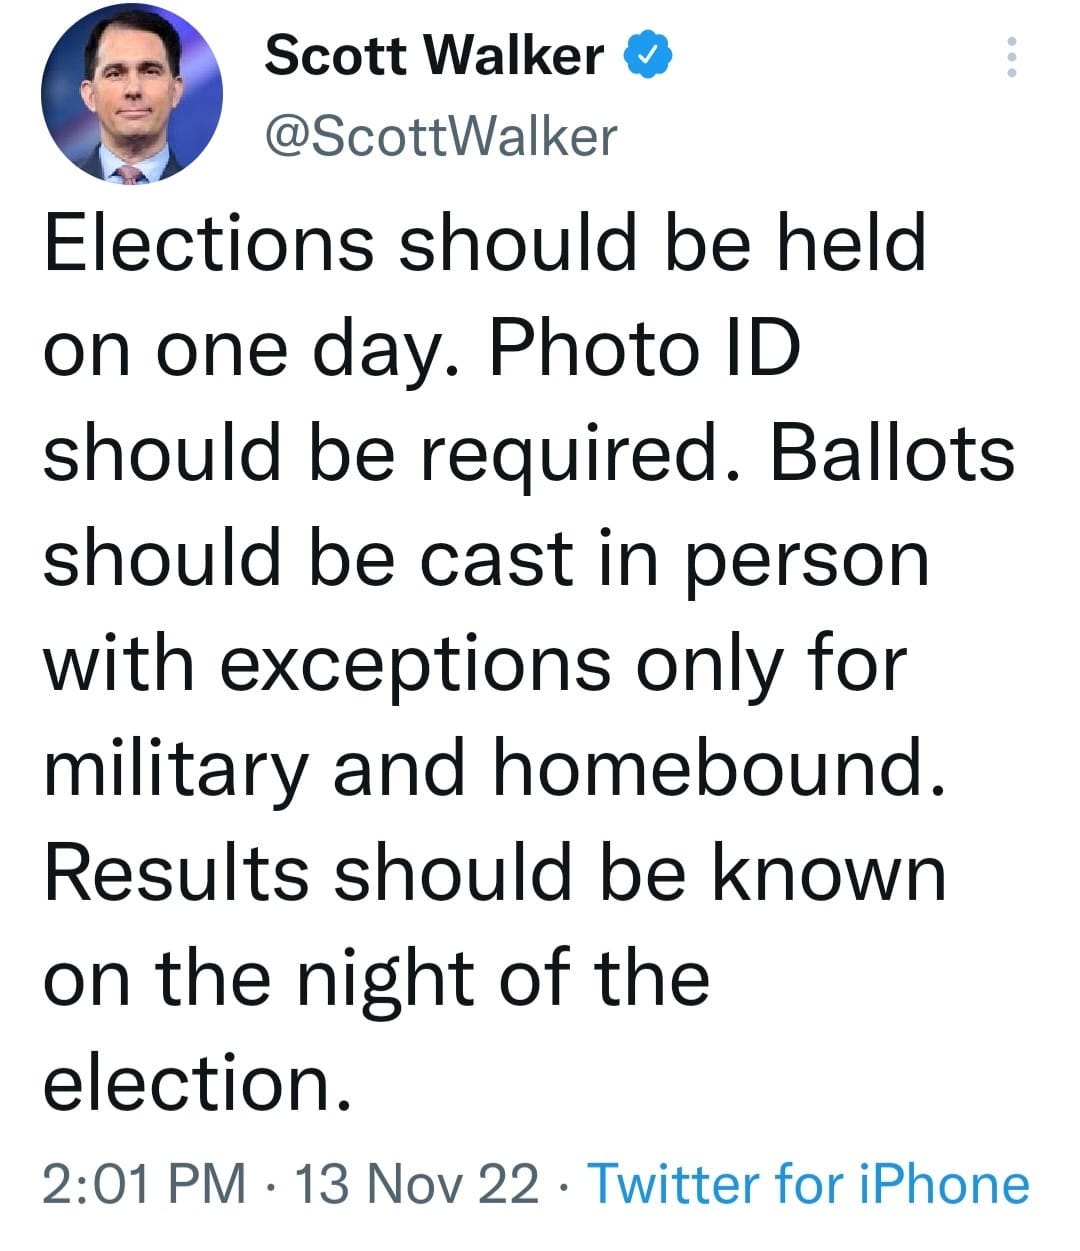 May be an image of 1 person and text that says 'Scott Walker @ScottWalker Elections should be held on one day. Photo ID should be required. Ballots should be cast in person with exceptions only for military and homebound. Results should be known on the night of the the election. 2:01 PM 13 Nov 22. Twitter for iPhone'